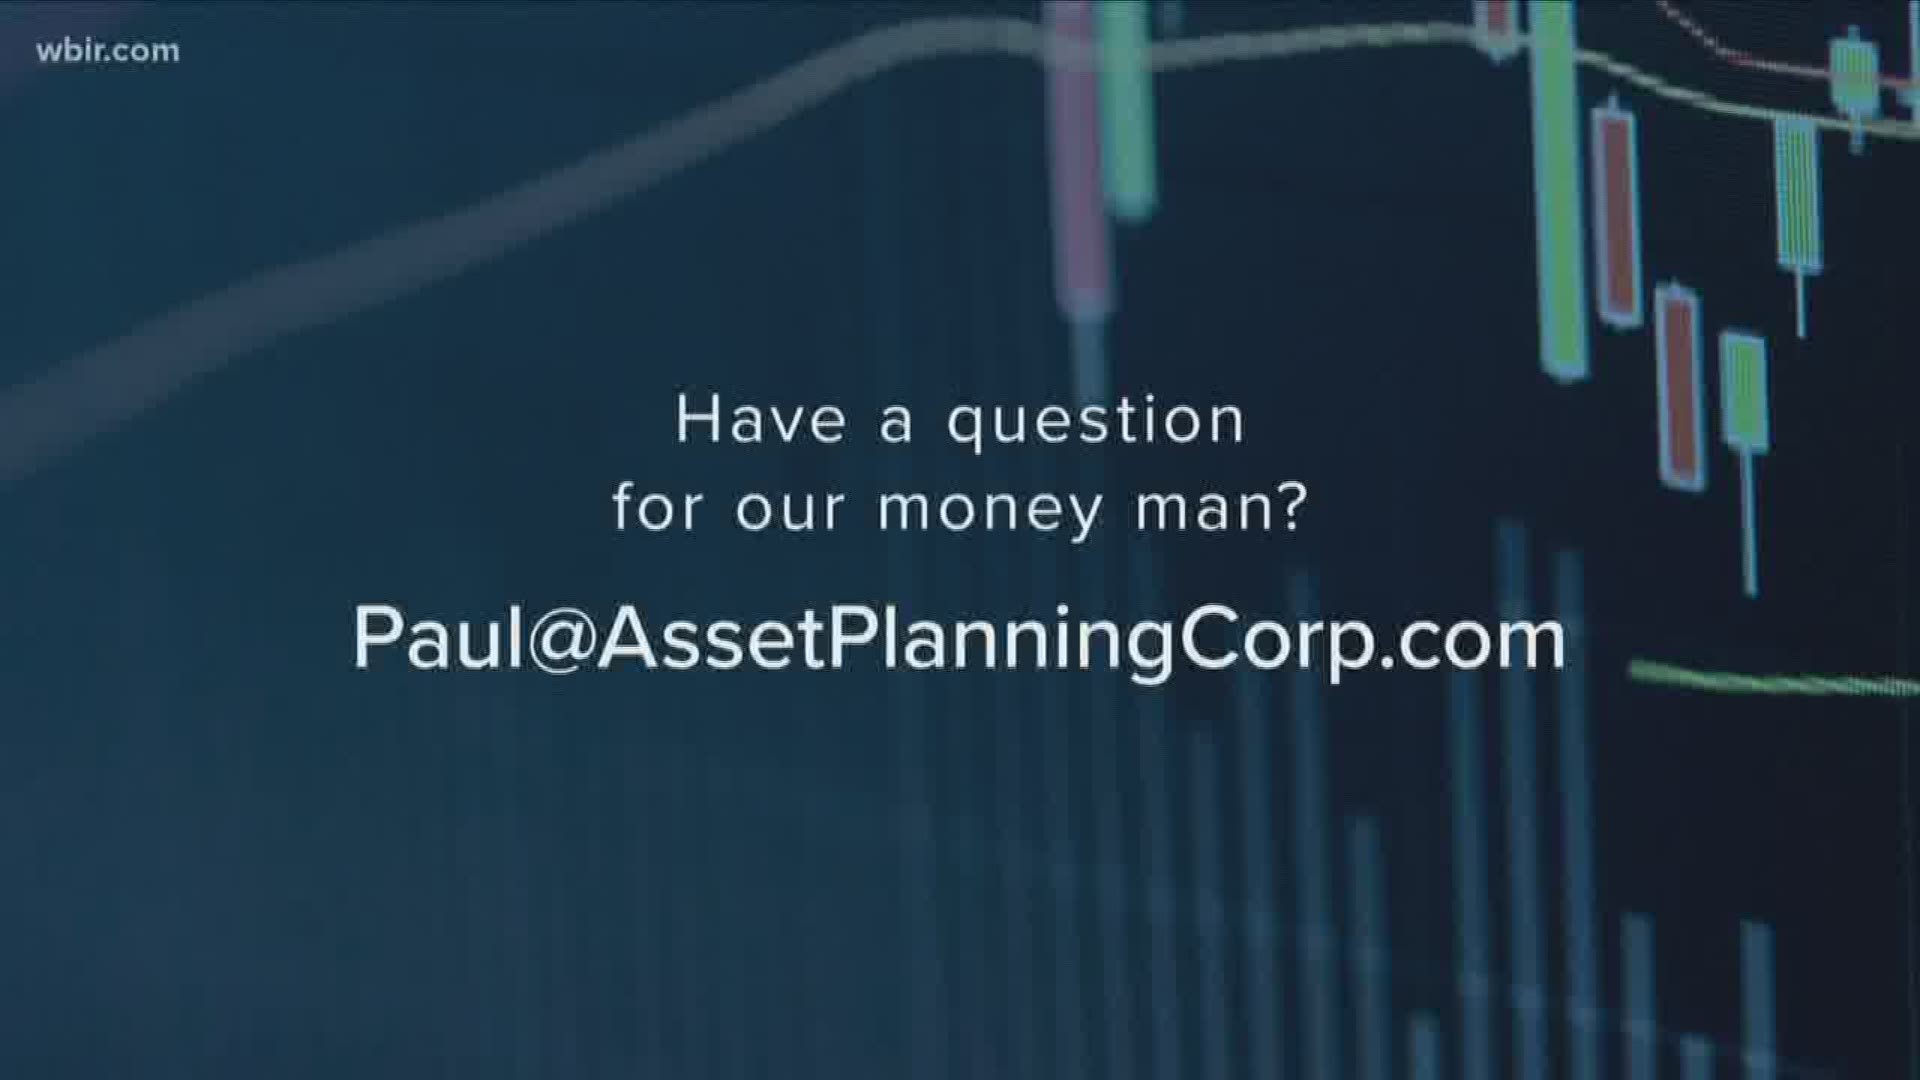 Moneyman Paul Fain with Asset Planning Corporation joins 10News to talk about investing in stocks.